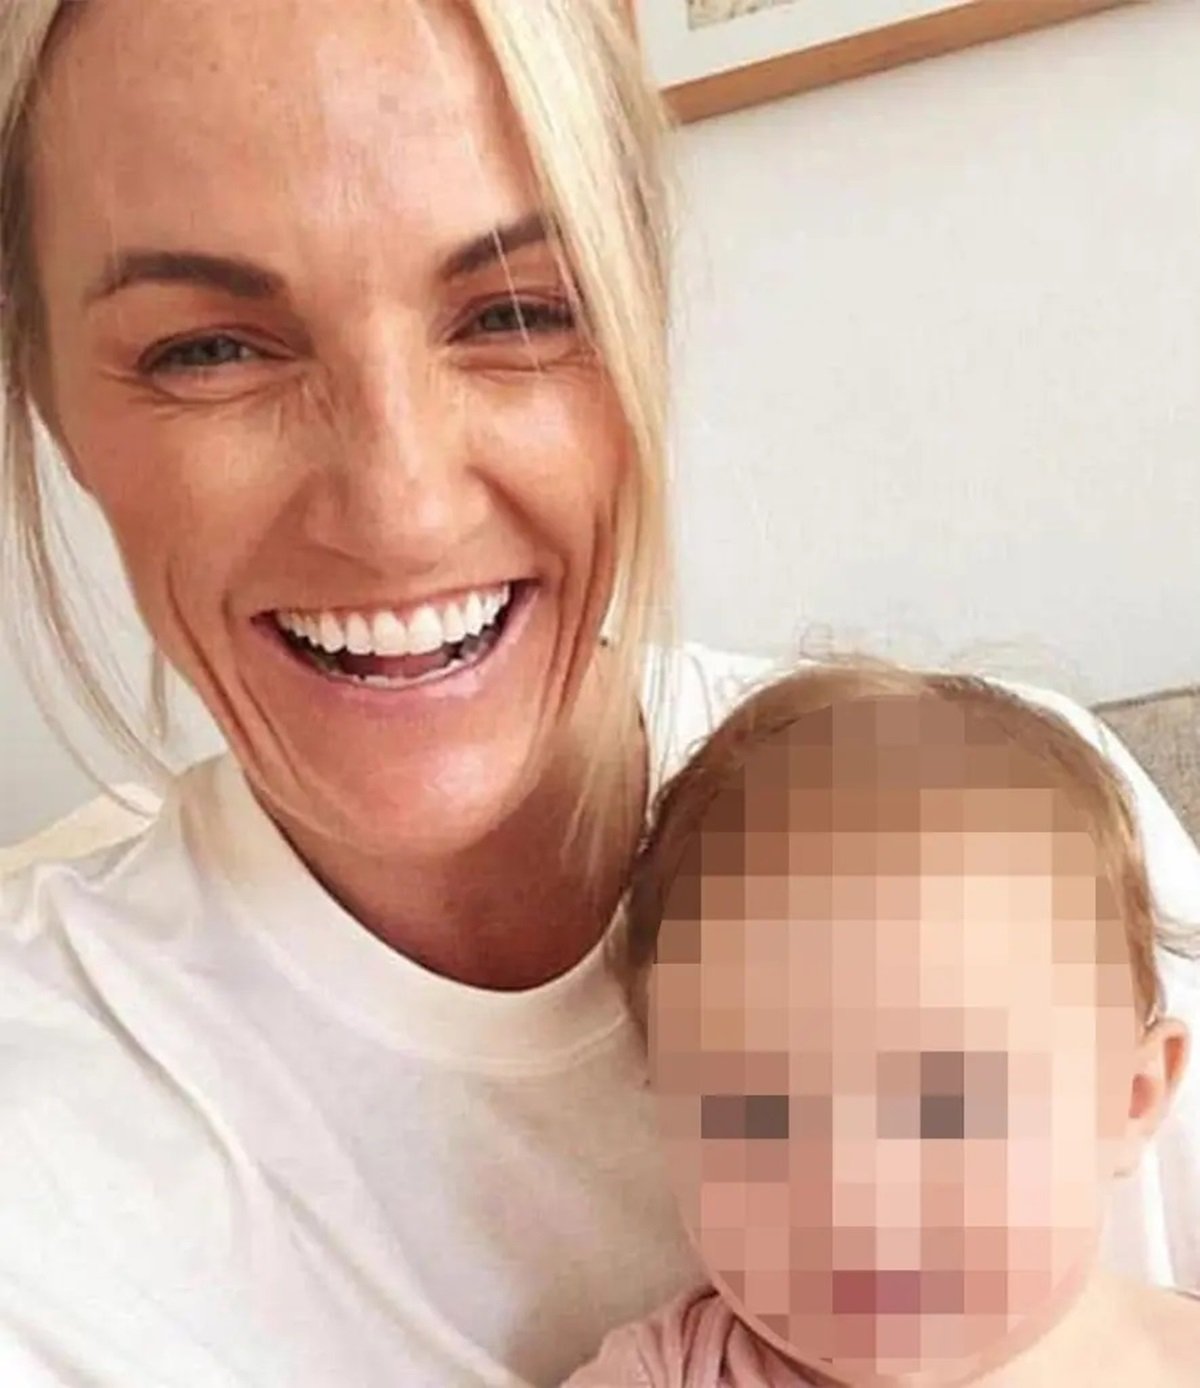 Heroic Mom Died Protecting Her Baby From Sydney Mall Stabbing Spree, Lifeinchd